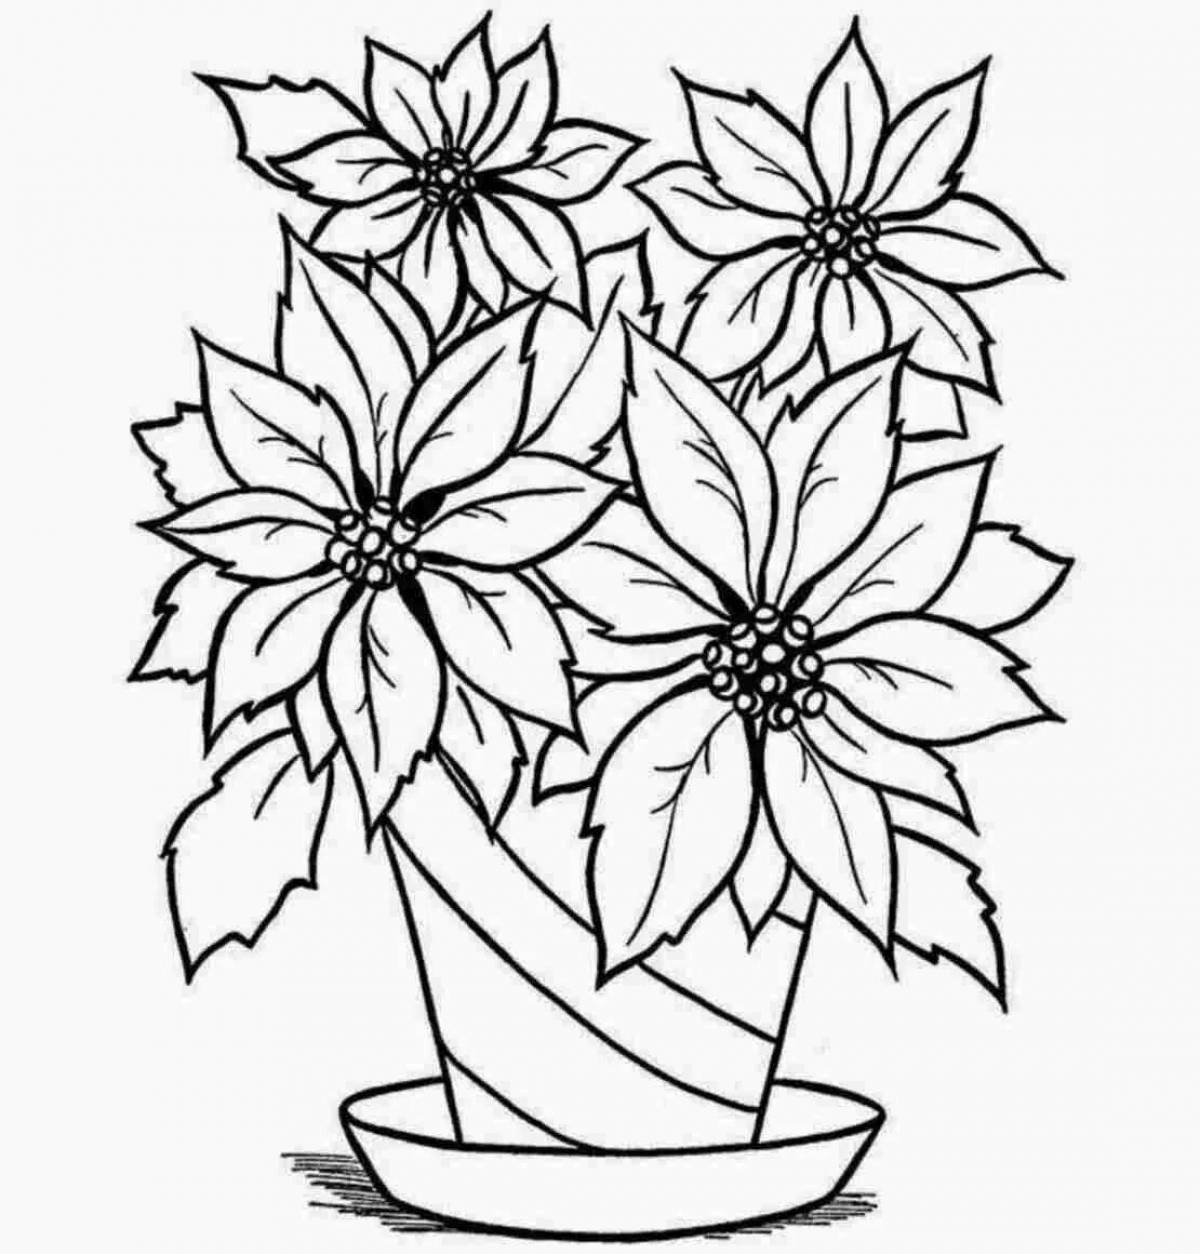 Colorful houseplant coloring page